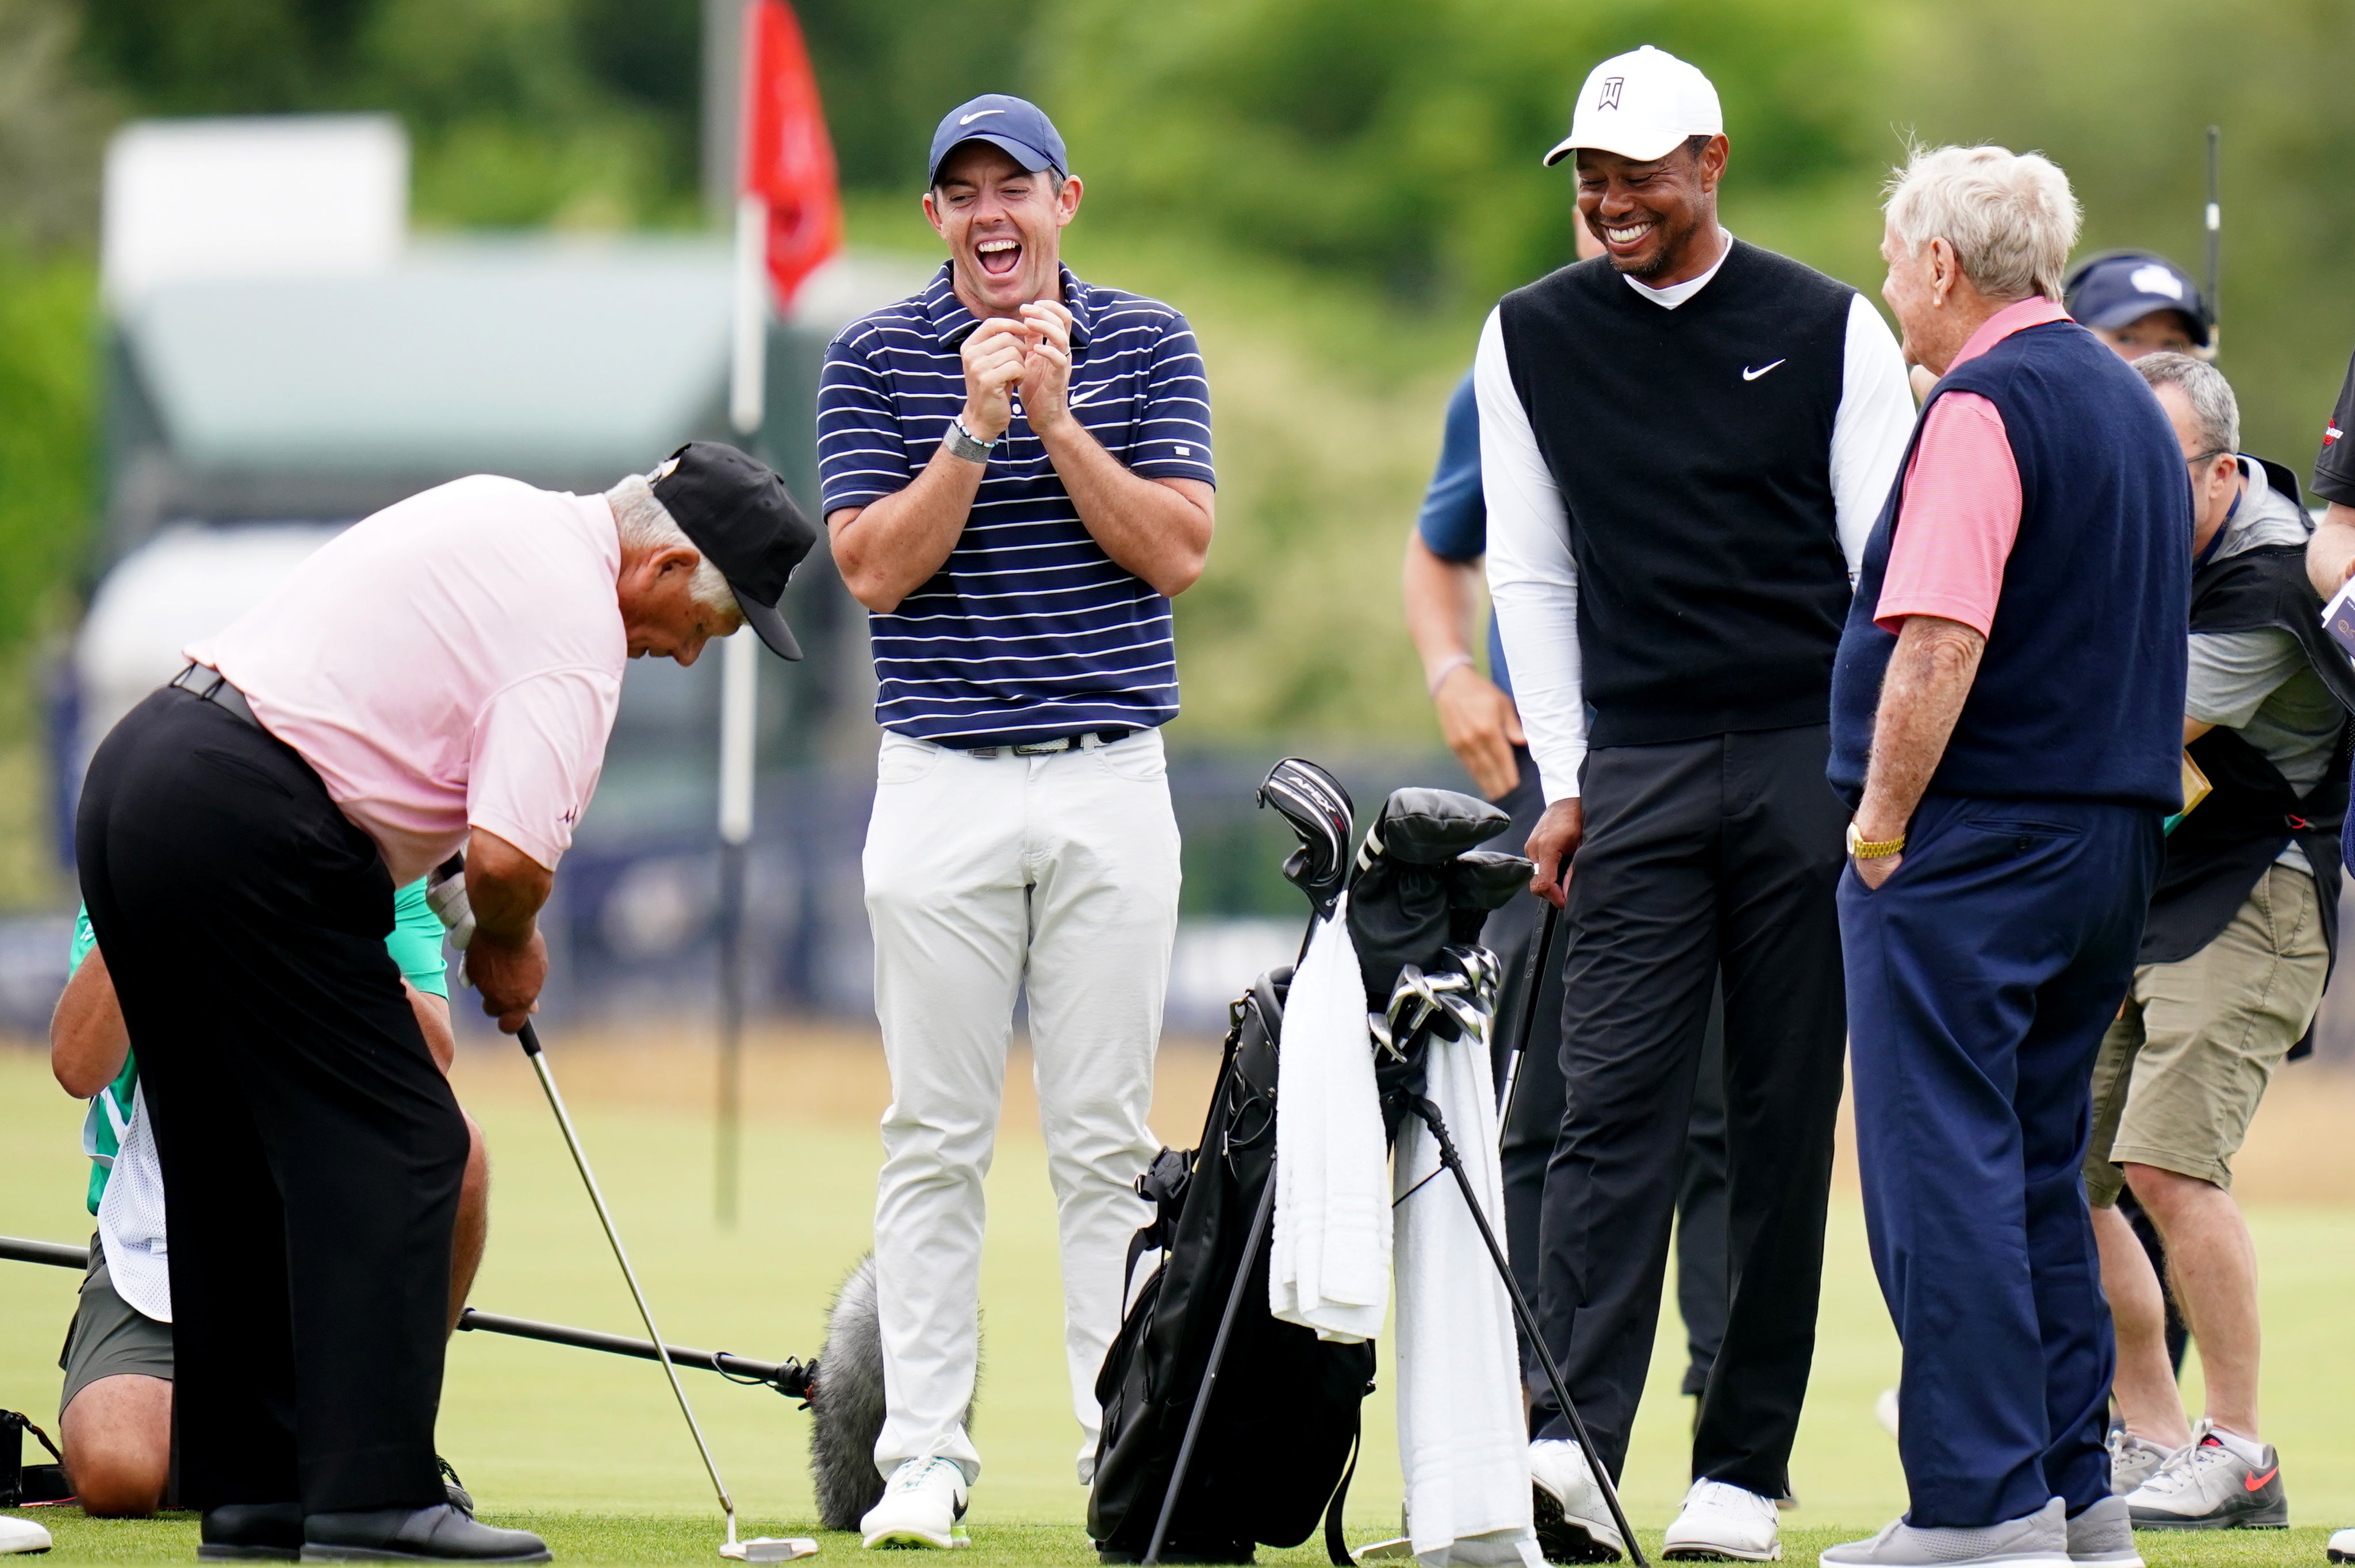 Rory McIlroy, Tiger Woods, Lee Trevino and Jack Nicklaus during the R&A Celebration of Champions event at the Old Course, St Andrews (Jane Barlow/PA)